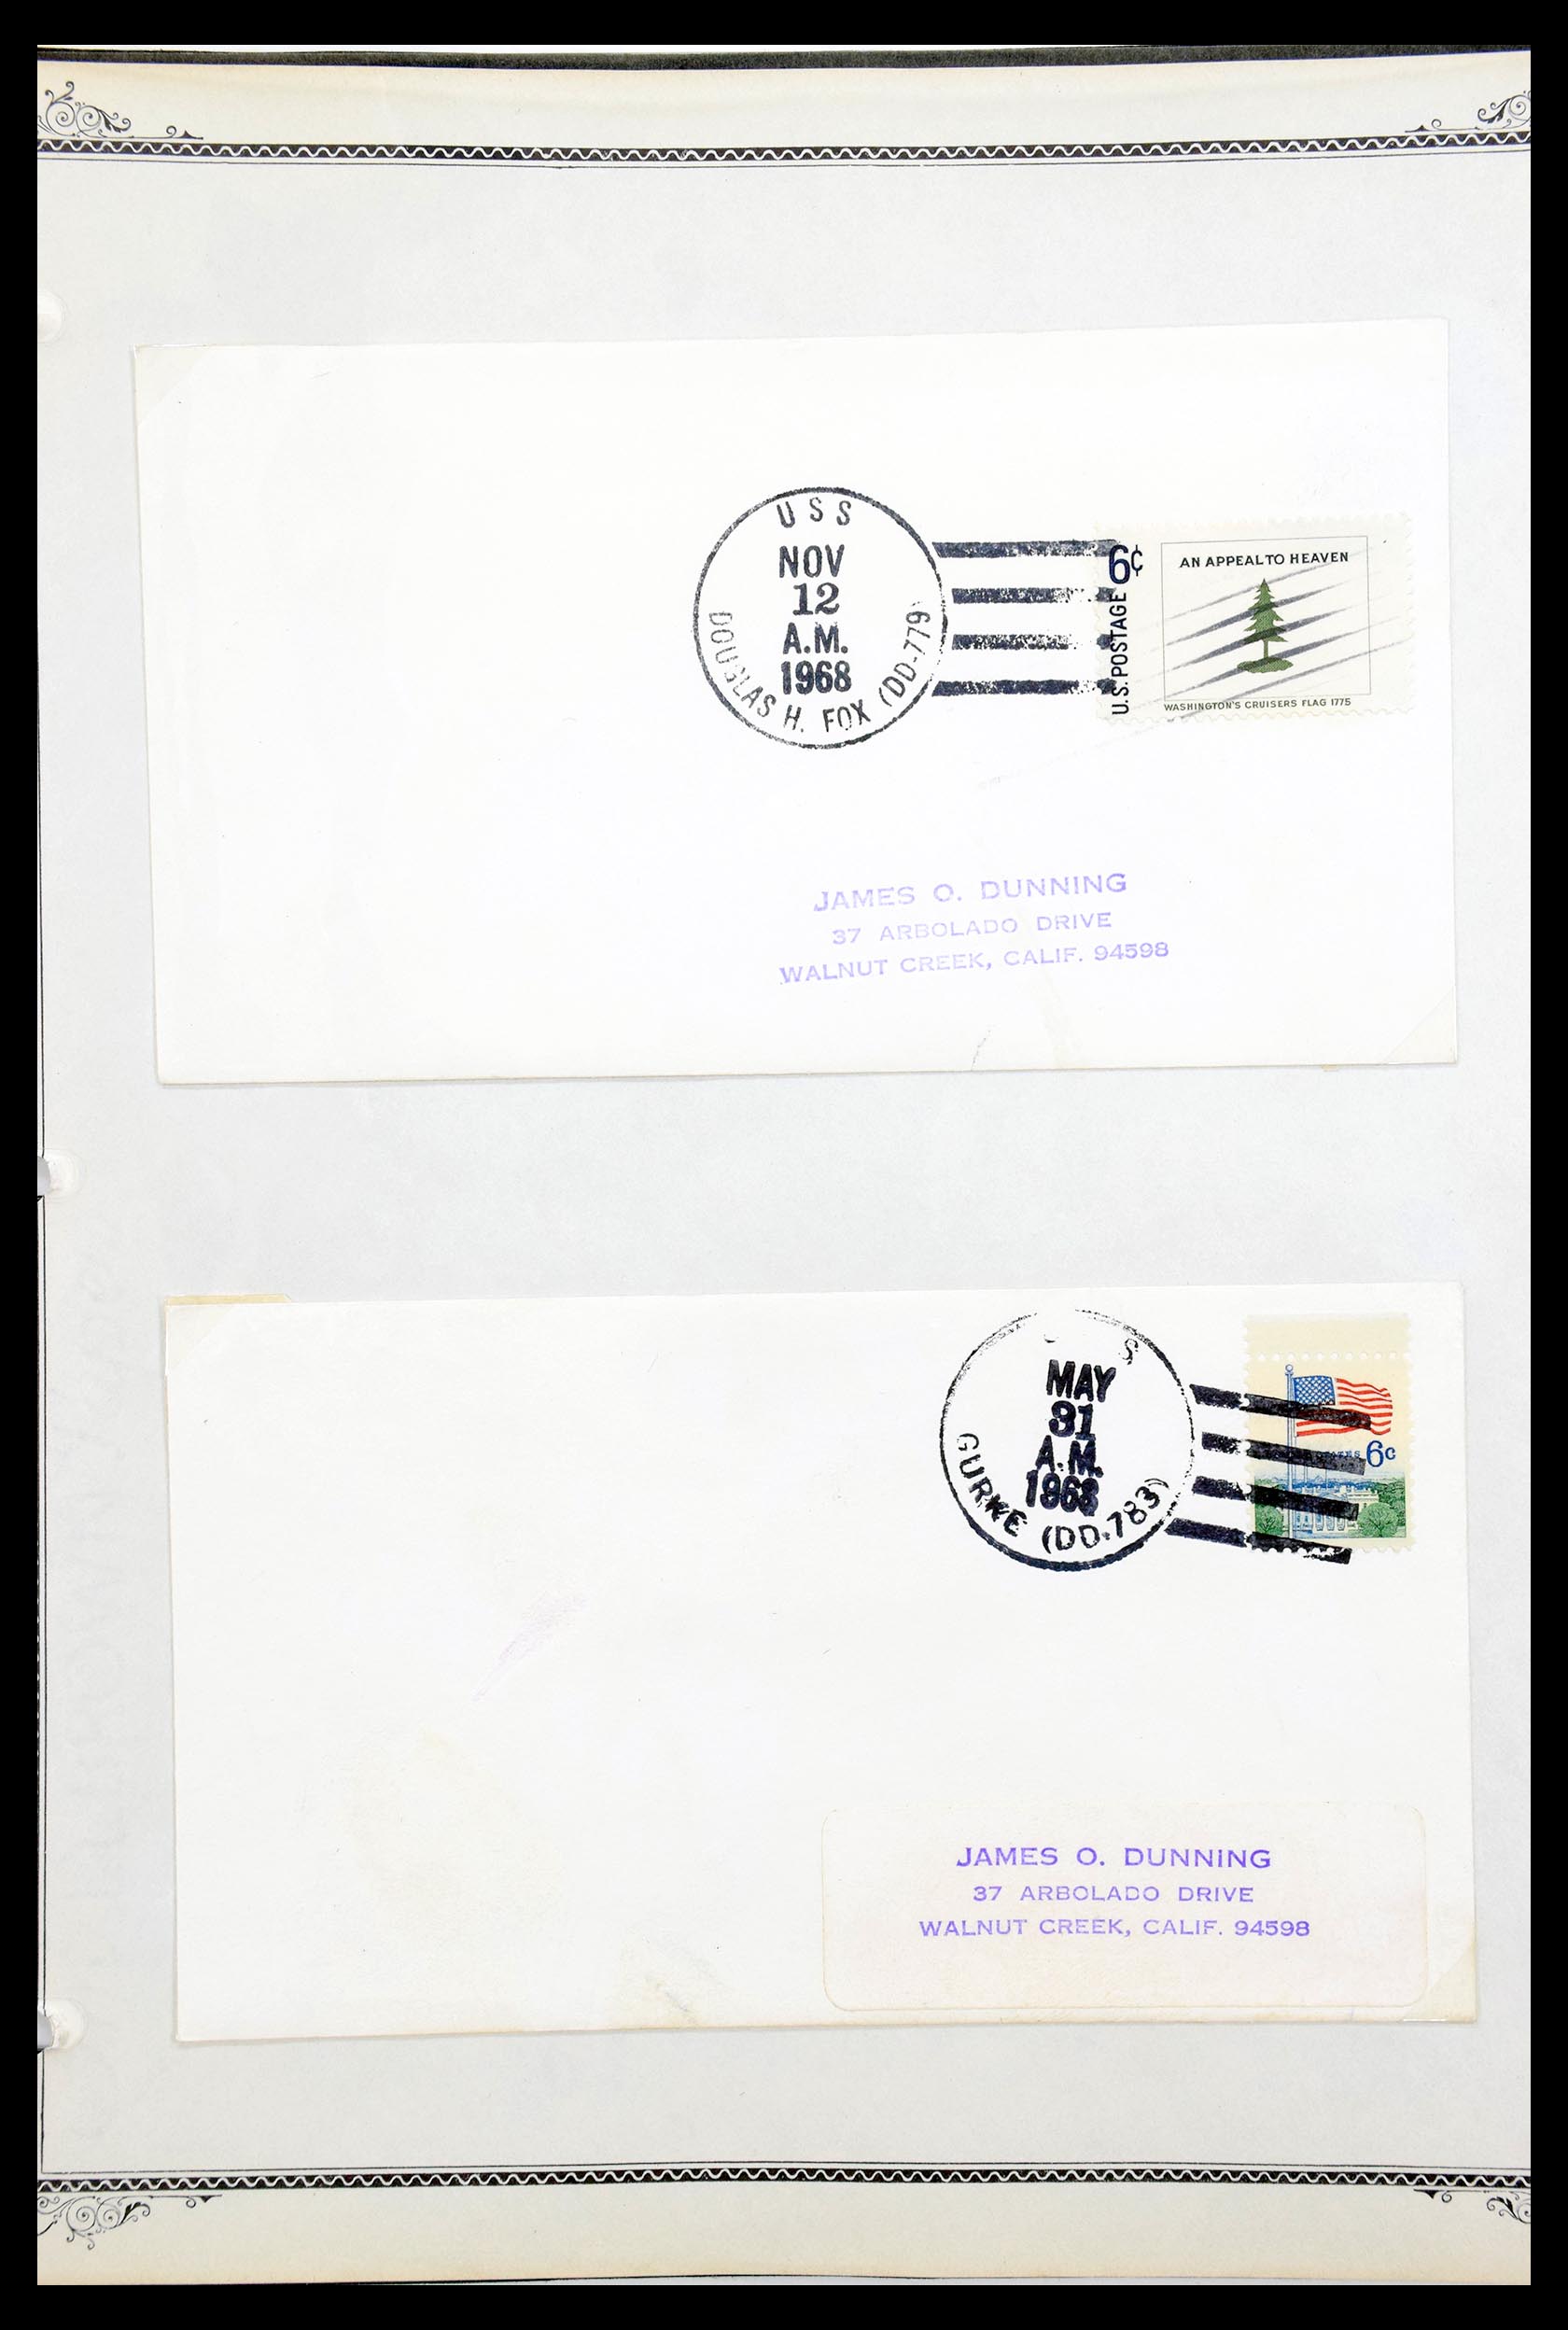 30341 041 - 30341 USA naval cover collection 1930-1970.